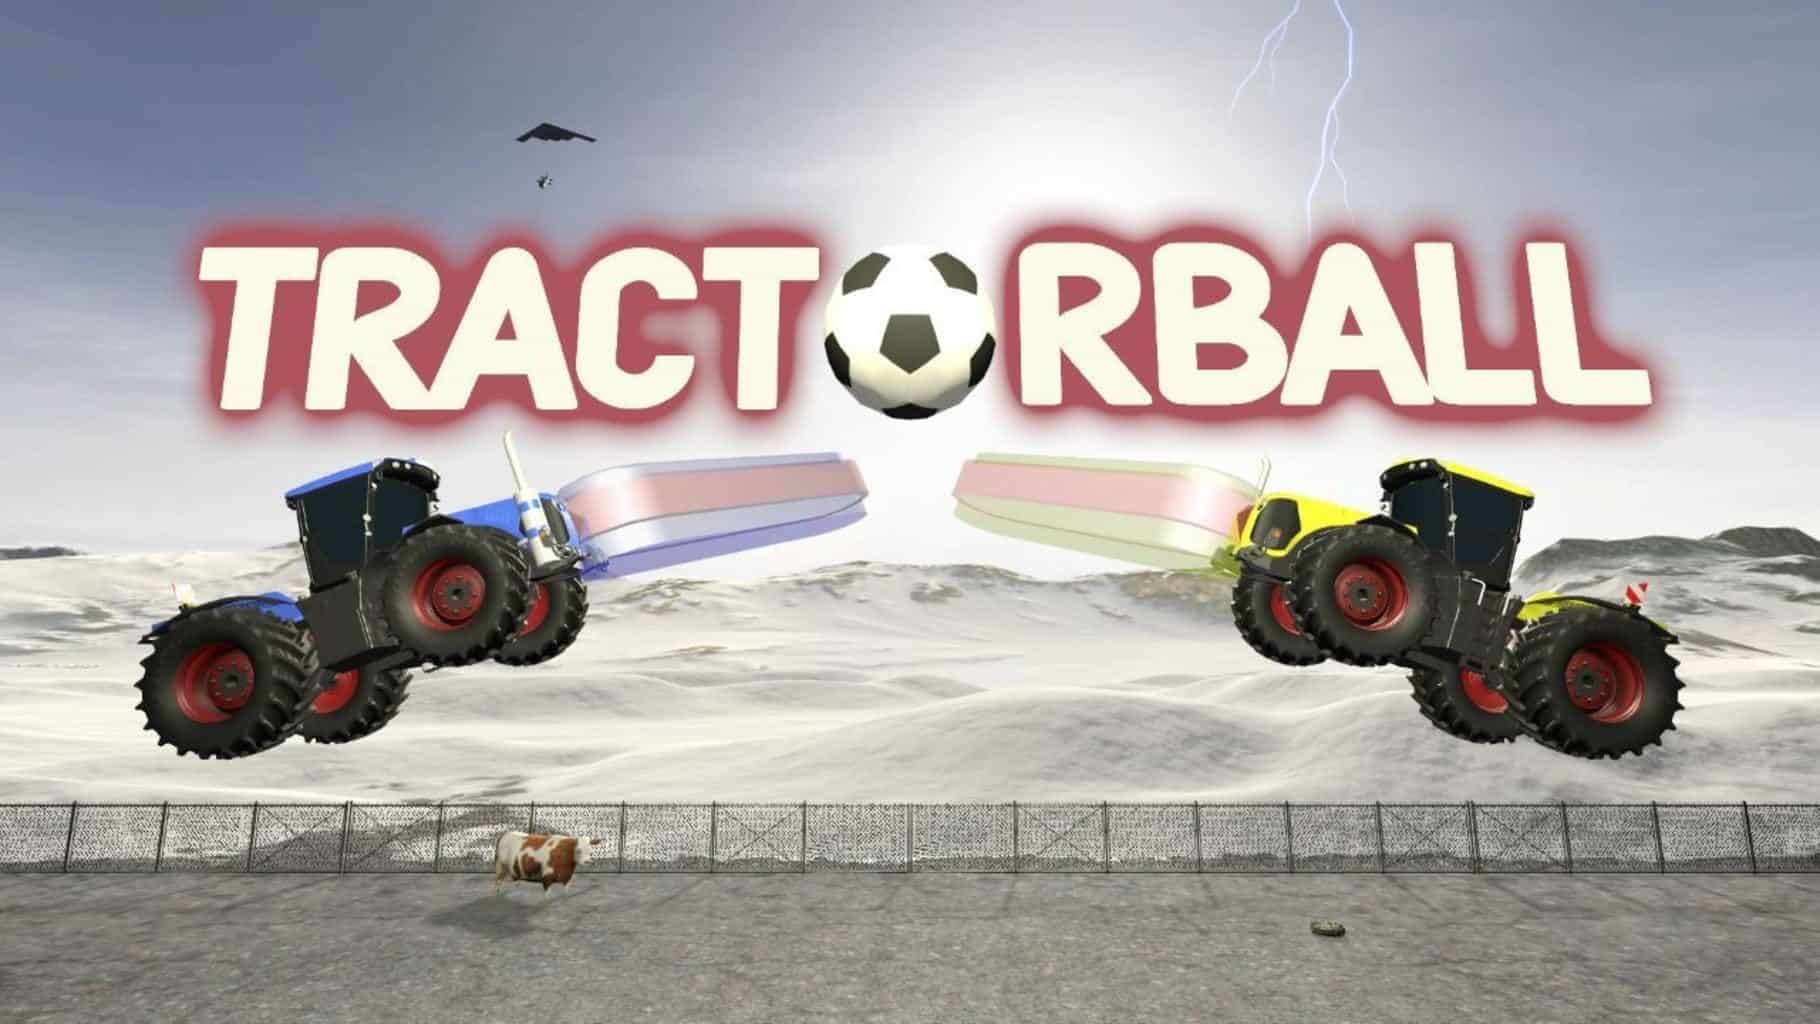 Tractorball